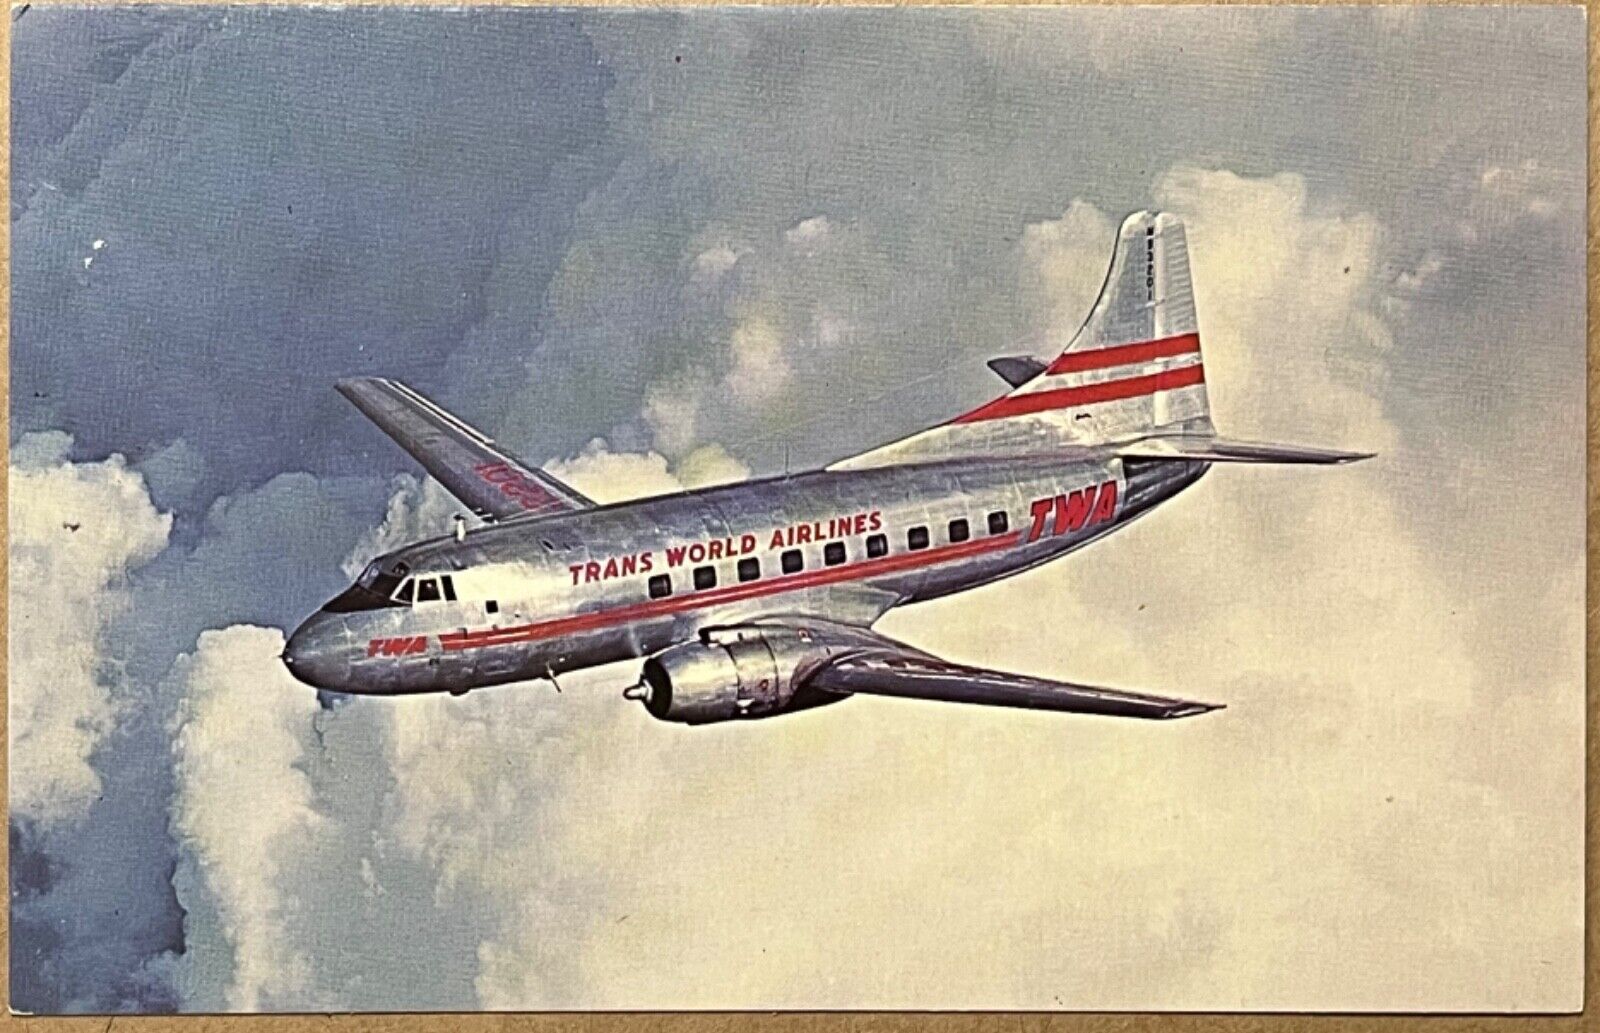 Trans World Airlines Martin 2-0-2A Aircraft Vintage Postcard c1950